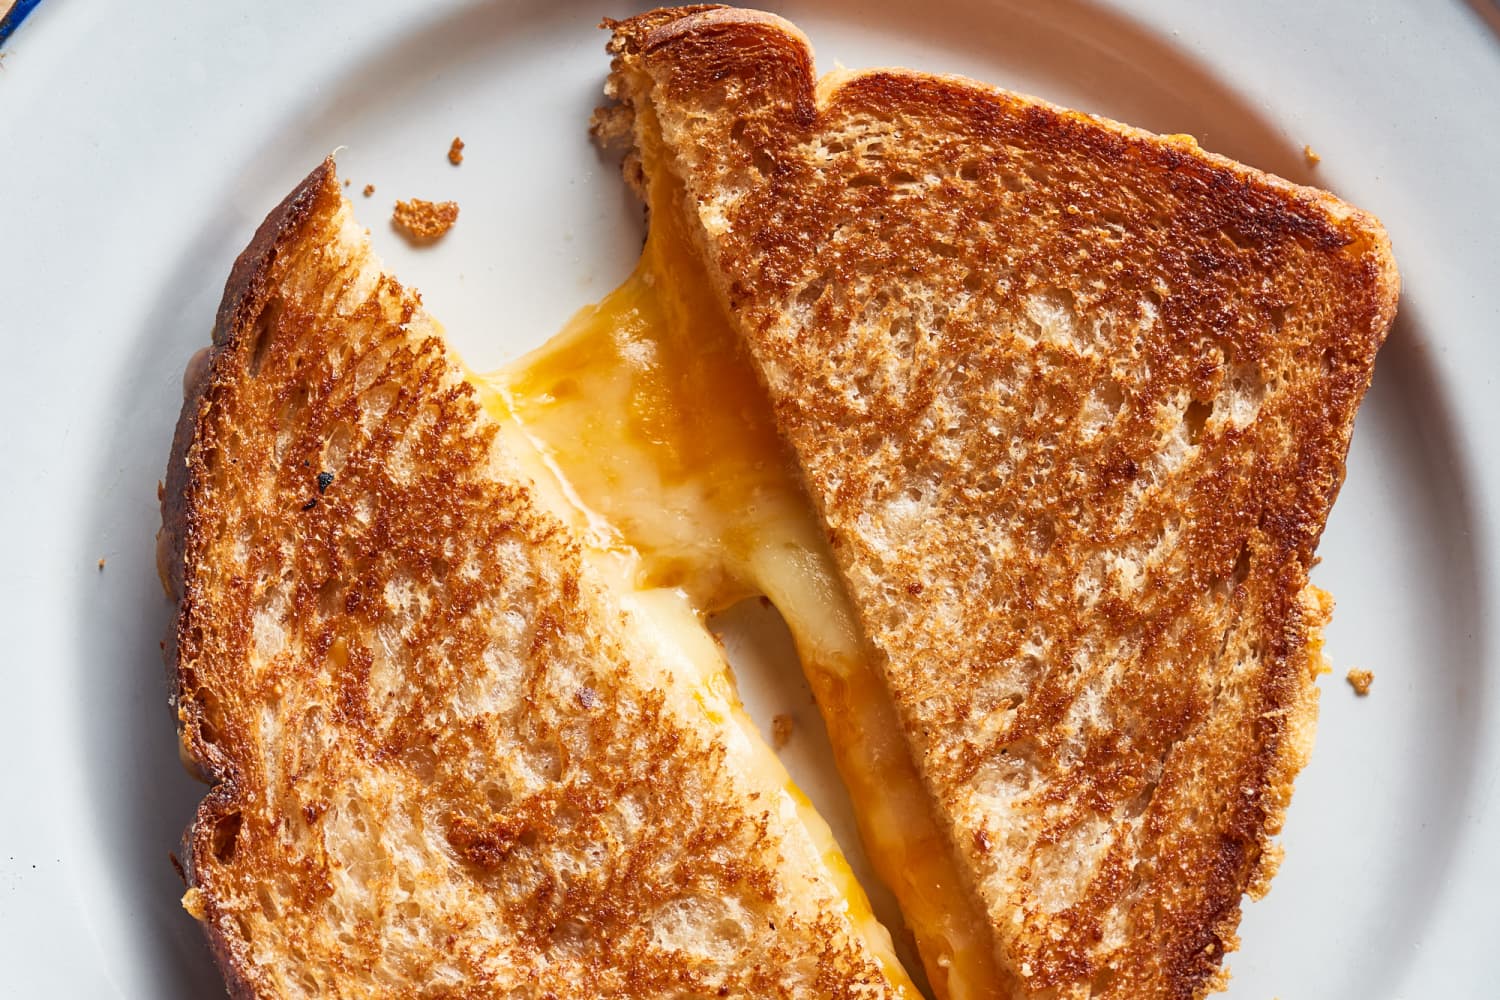 How To Make a Grilled Cheese in Your Toaster Oven